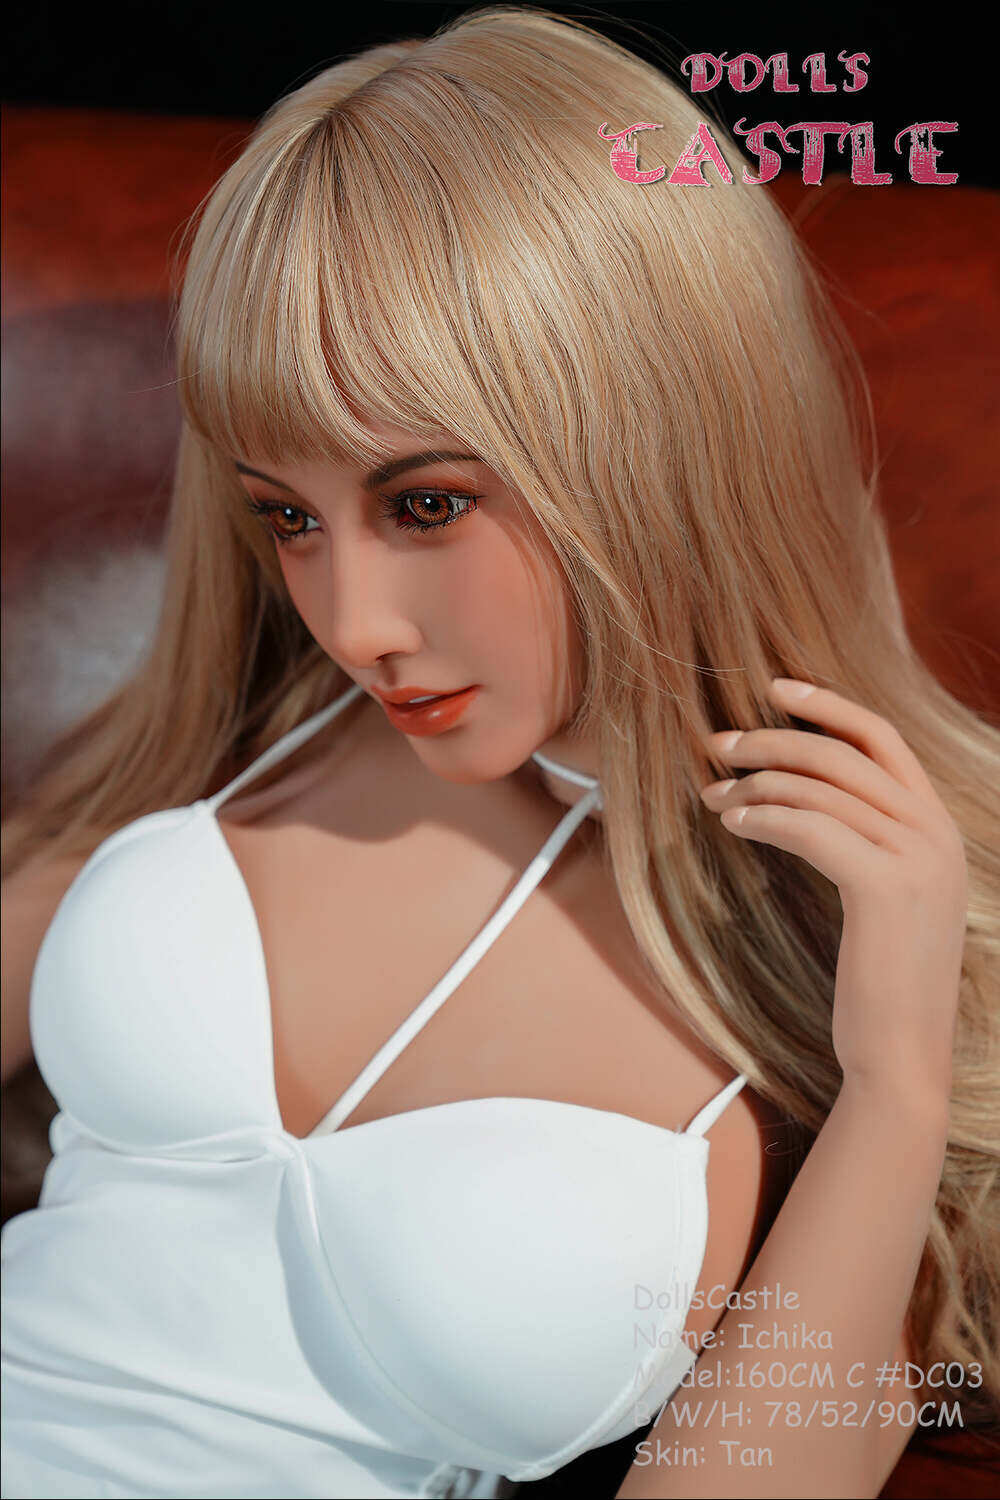 Alaura - E-Cup Pretty Dolls Castle 163cm(5ft4) Love Dolls Real Sex Doll Demonstration (US In Stock) image2